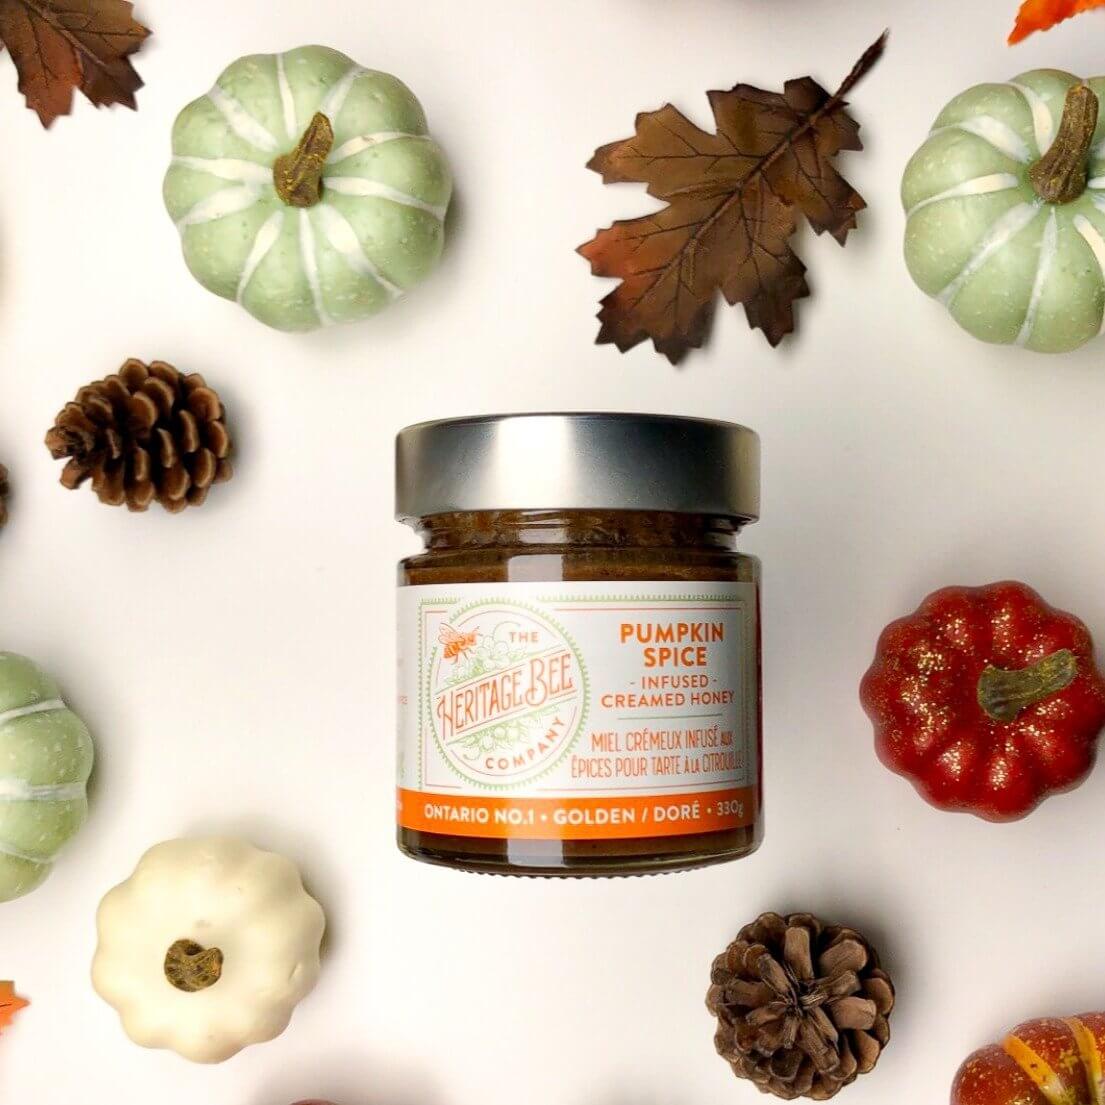 Heritage Bee Co's Pumpkin Spice infused creamed honey is perfect for fall. Made with an organic spice blend.